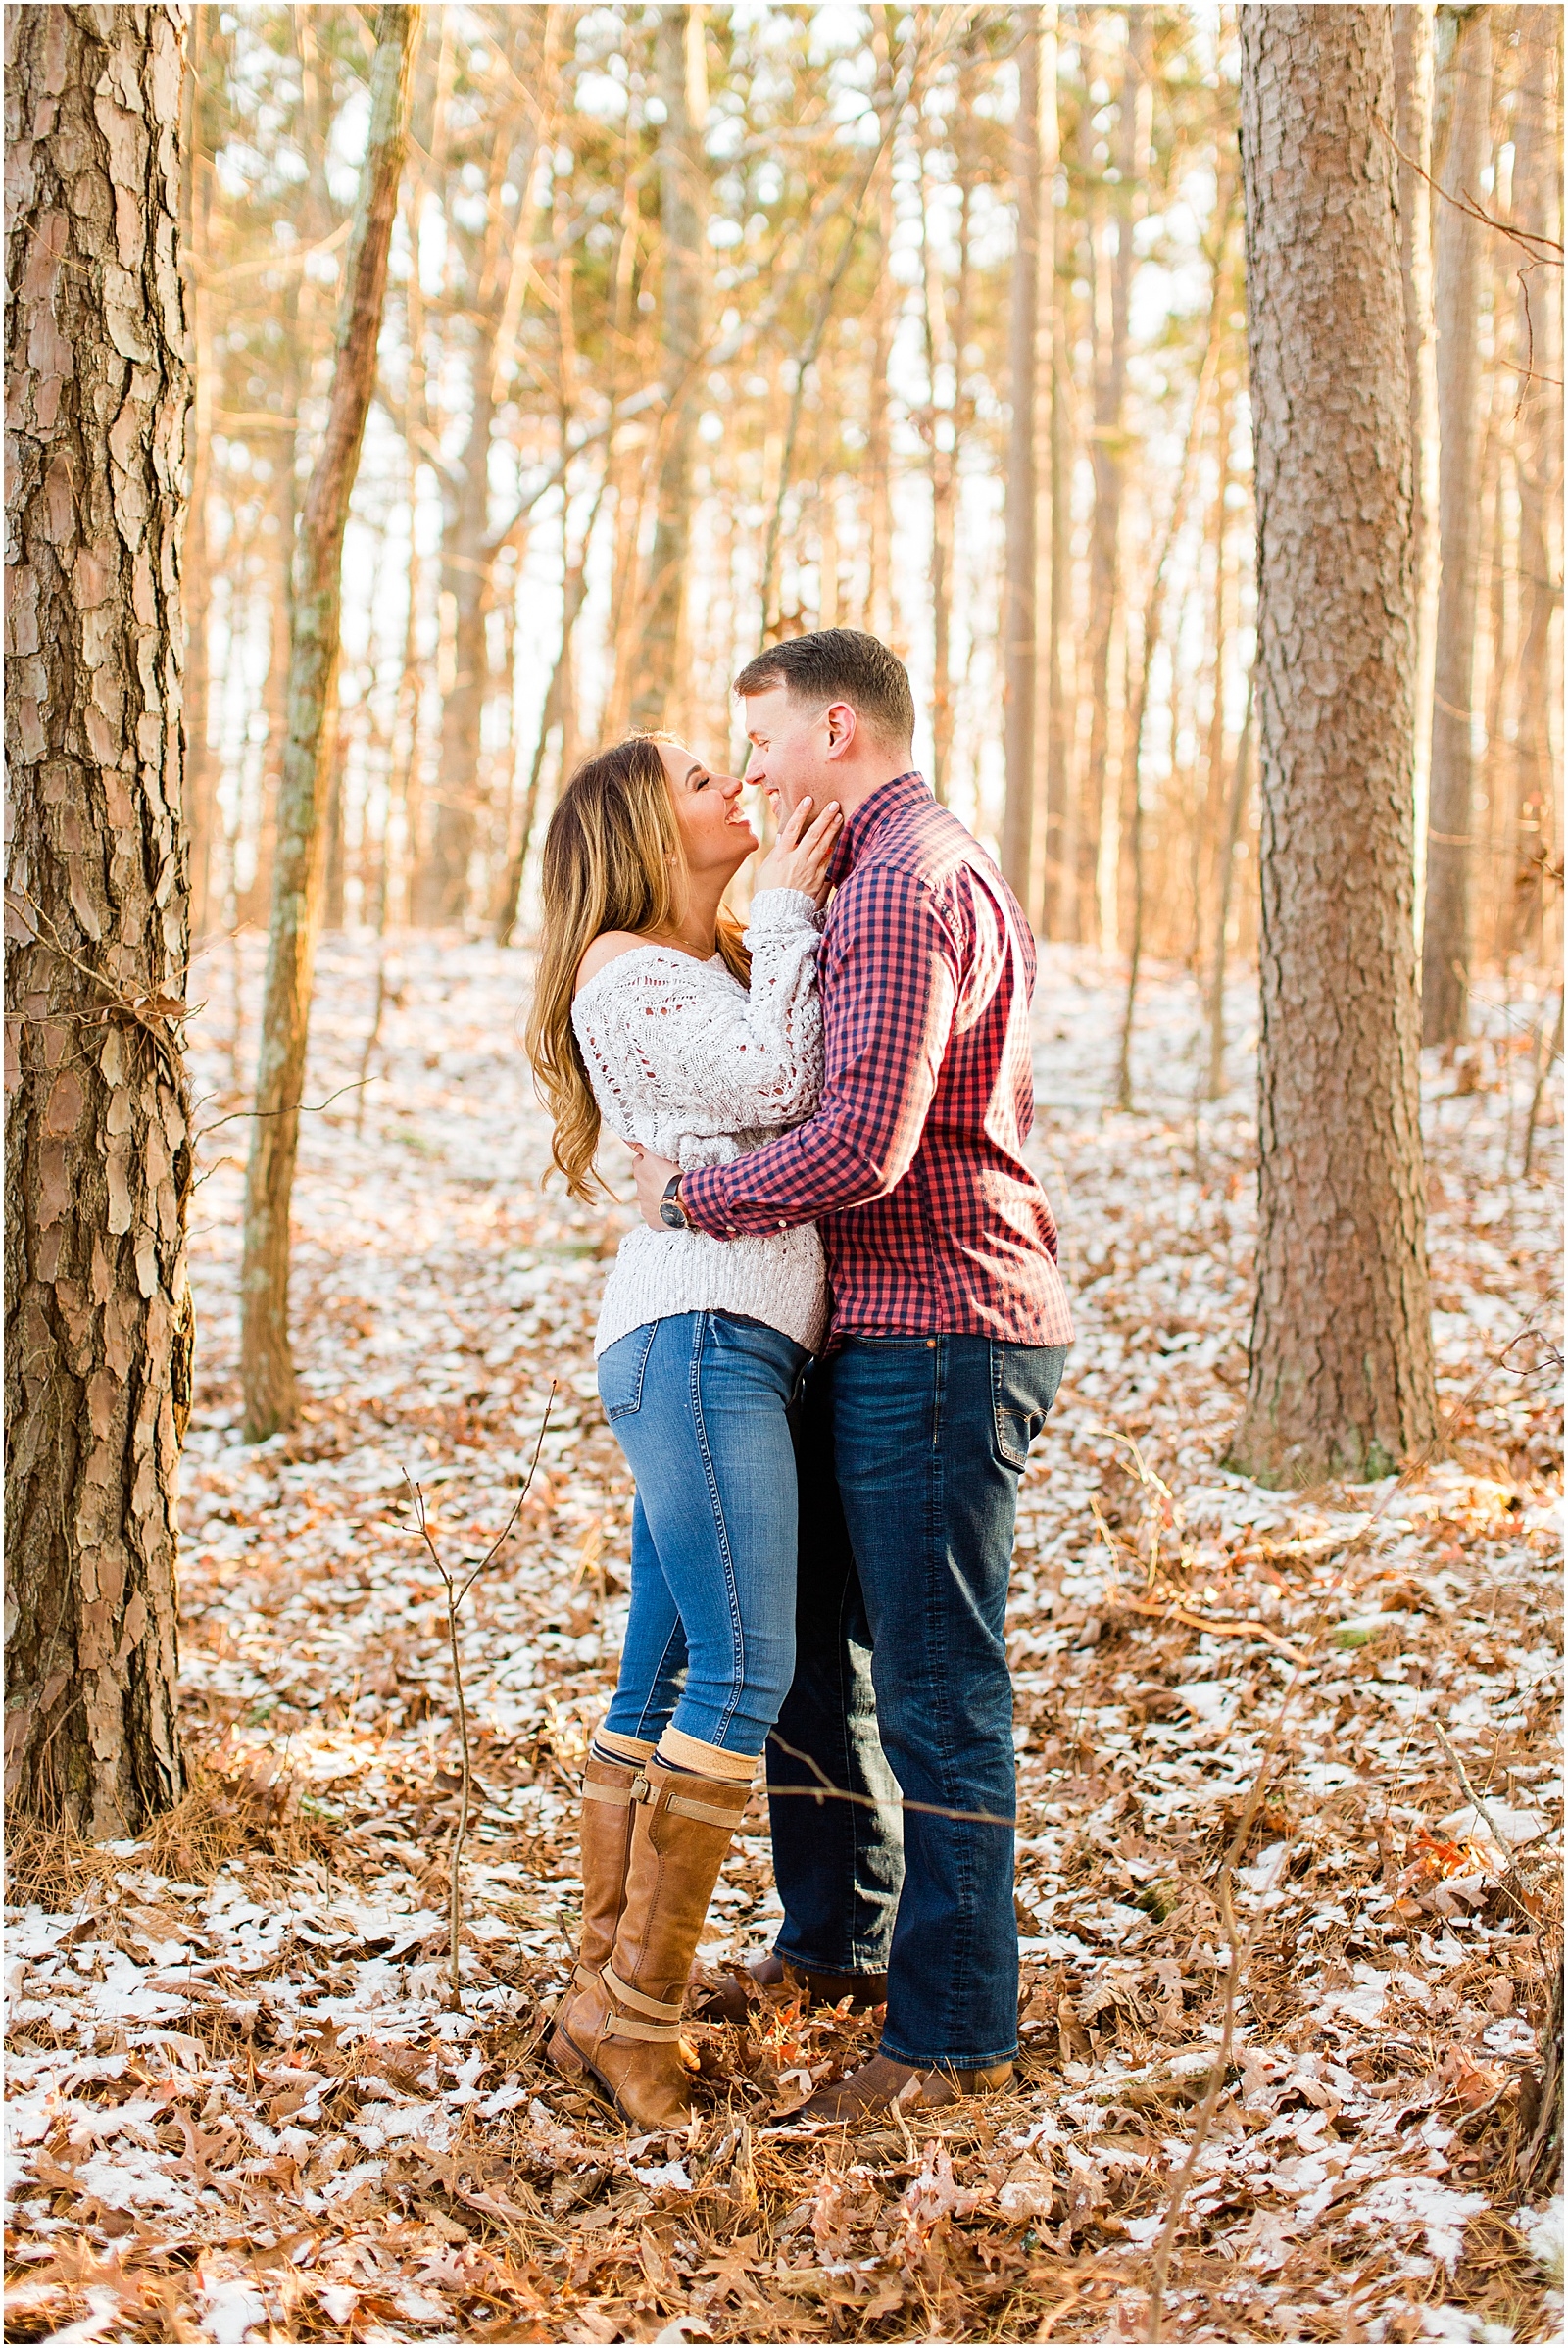 A Sunny Garden of the Gods Engagement Session | Shiloh and Lee | Bret and Brandie Photography036.jpg